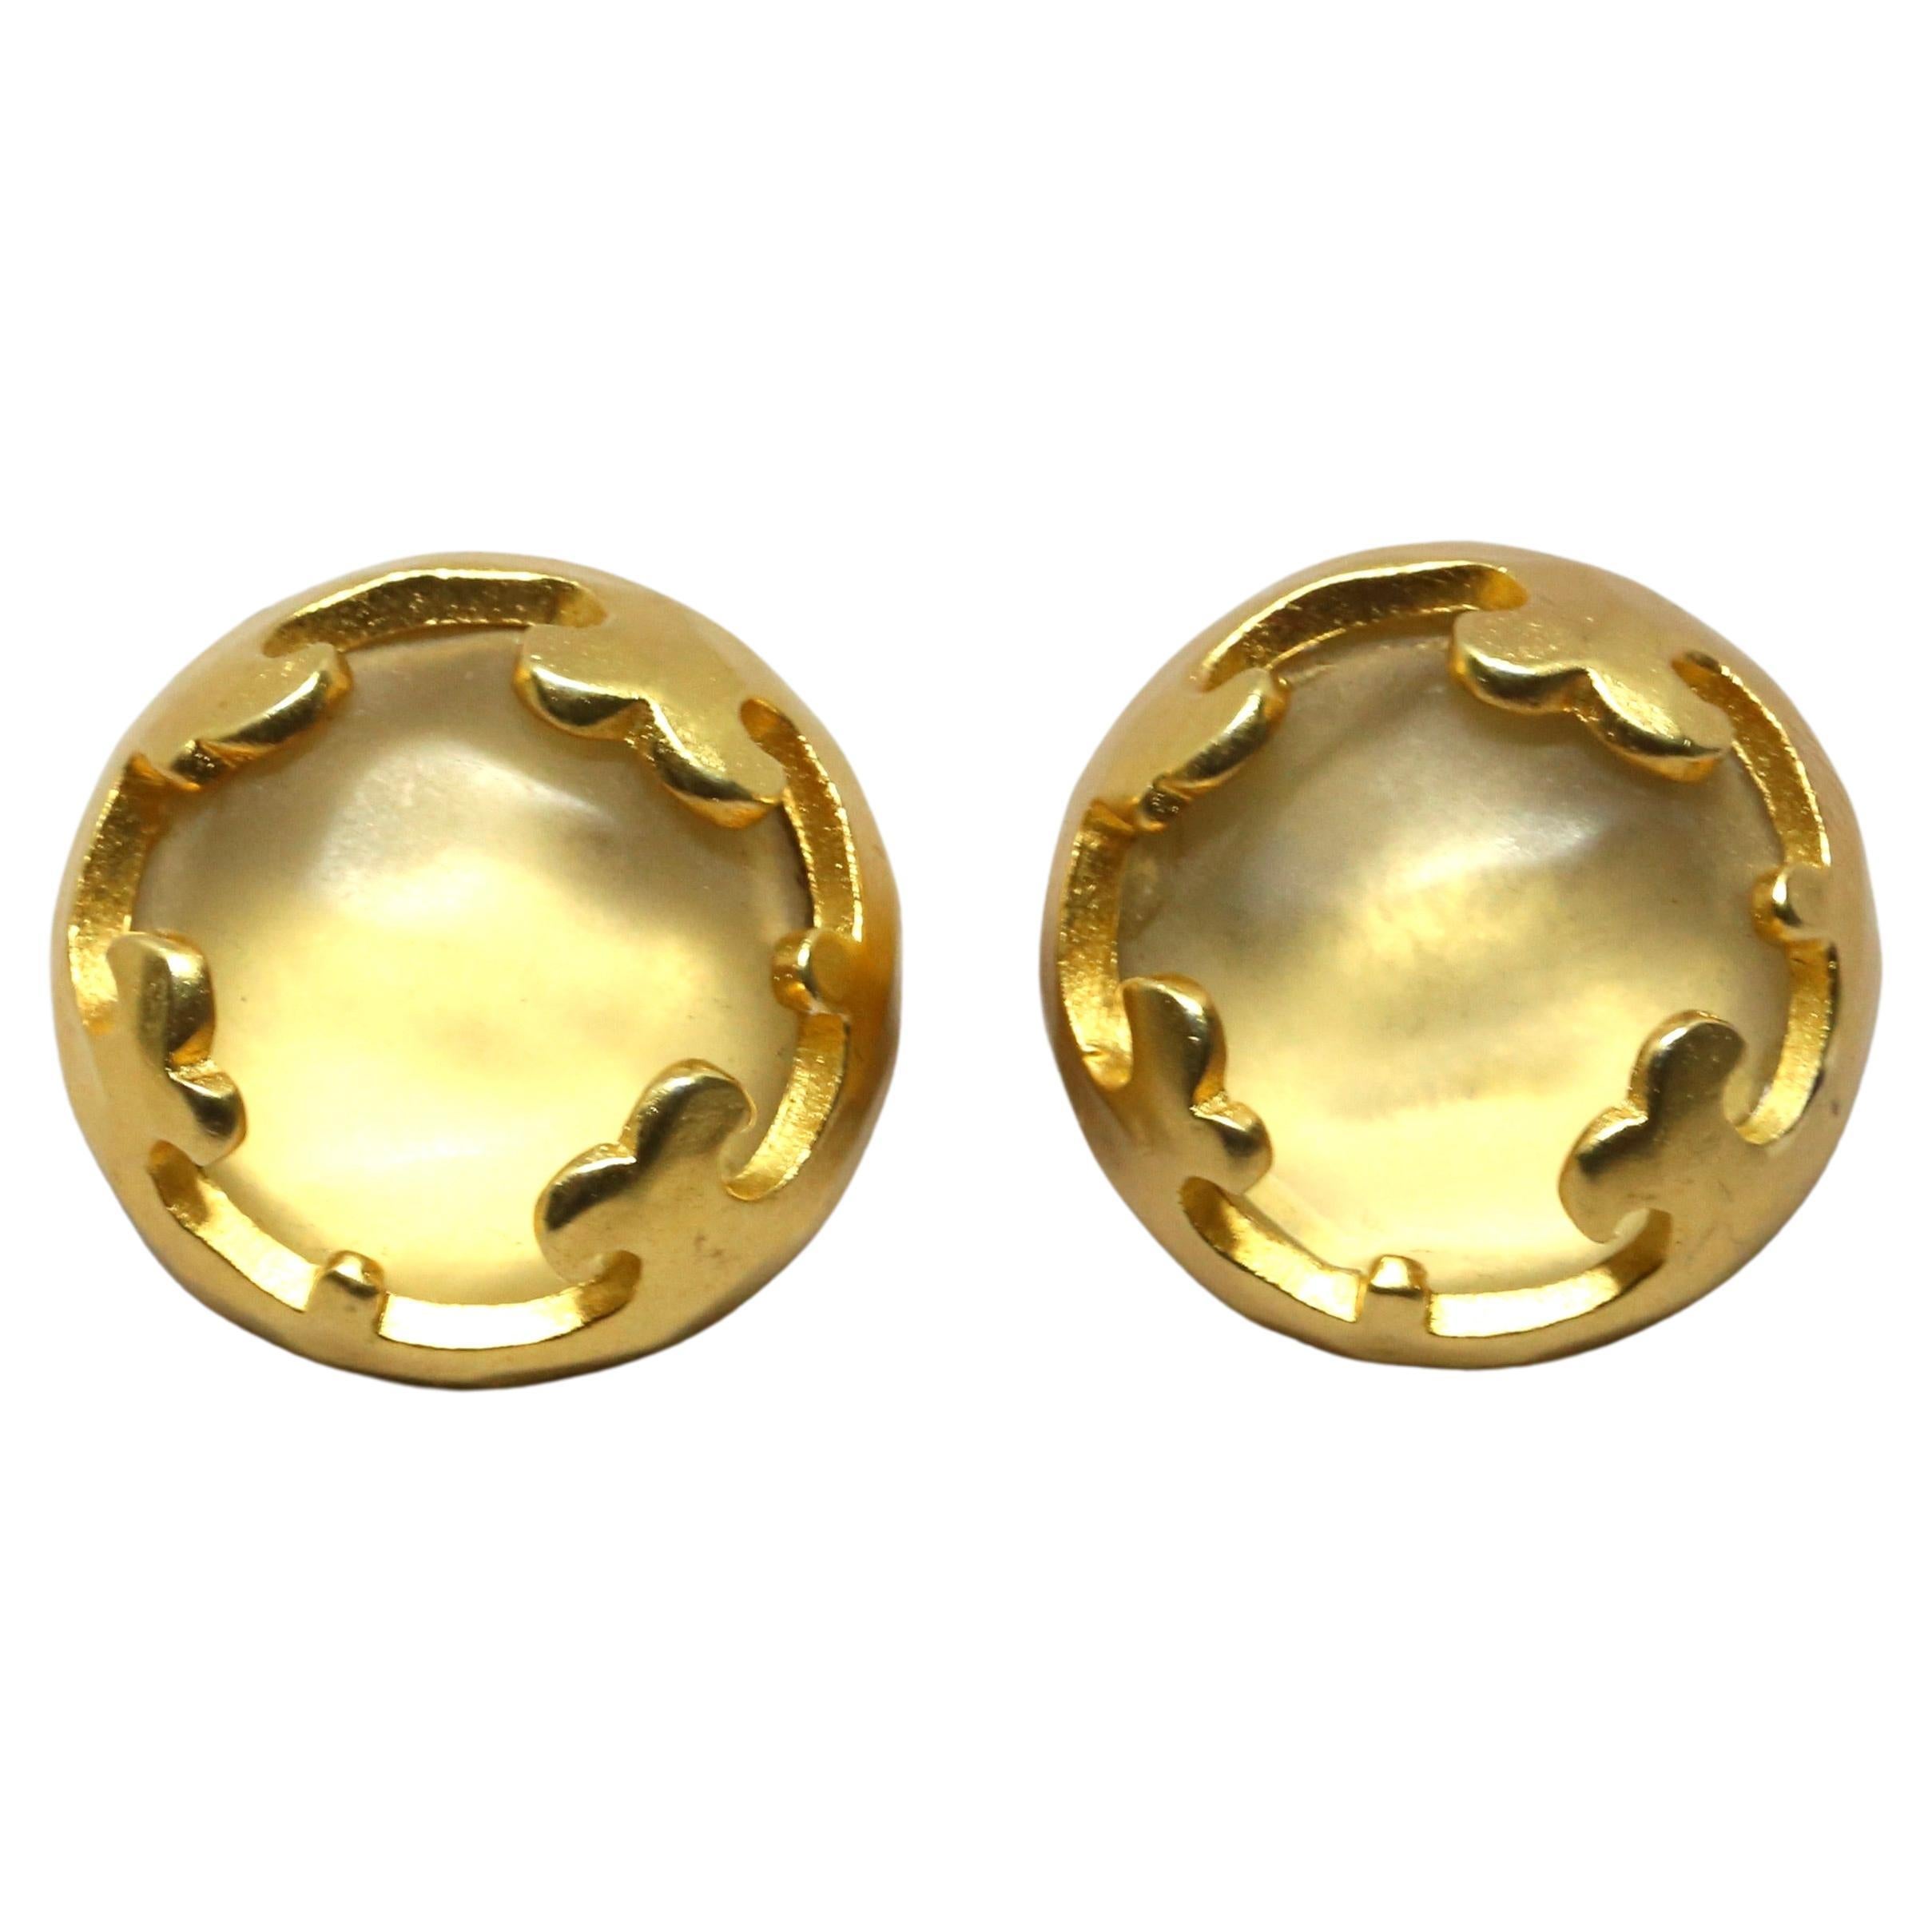 Matte-goldtone, pierced earrings with frosted cabochon stones from Karl Lagerfeld dating to the 1980's. Approximate measurement: 1